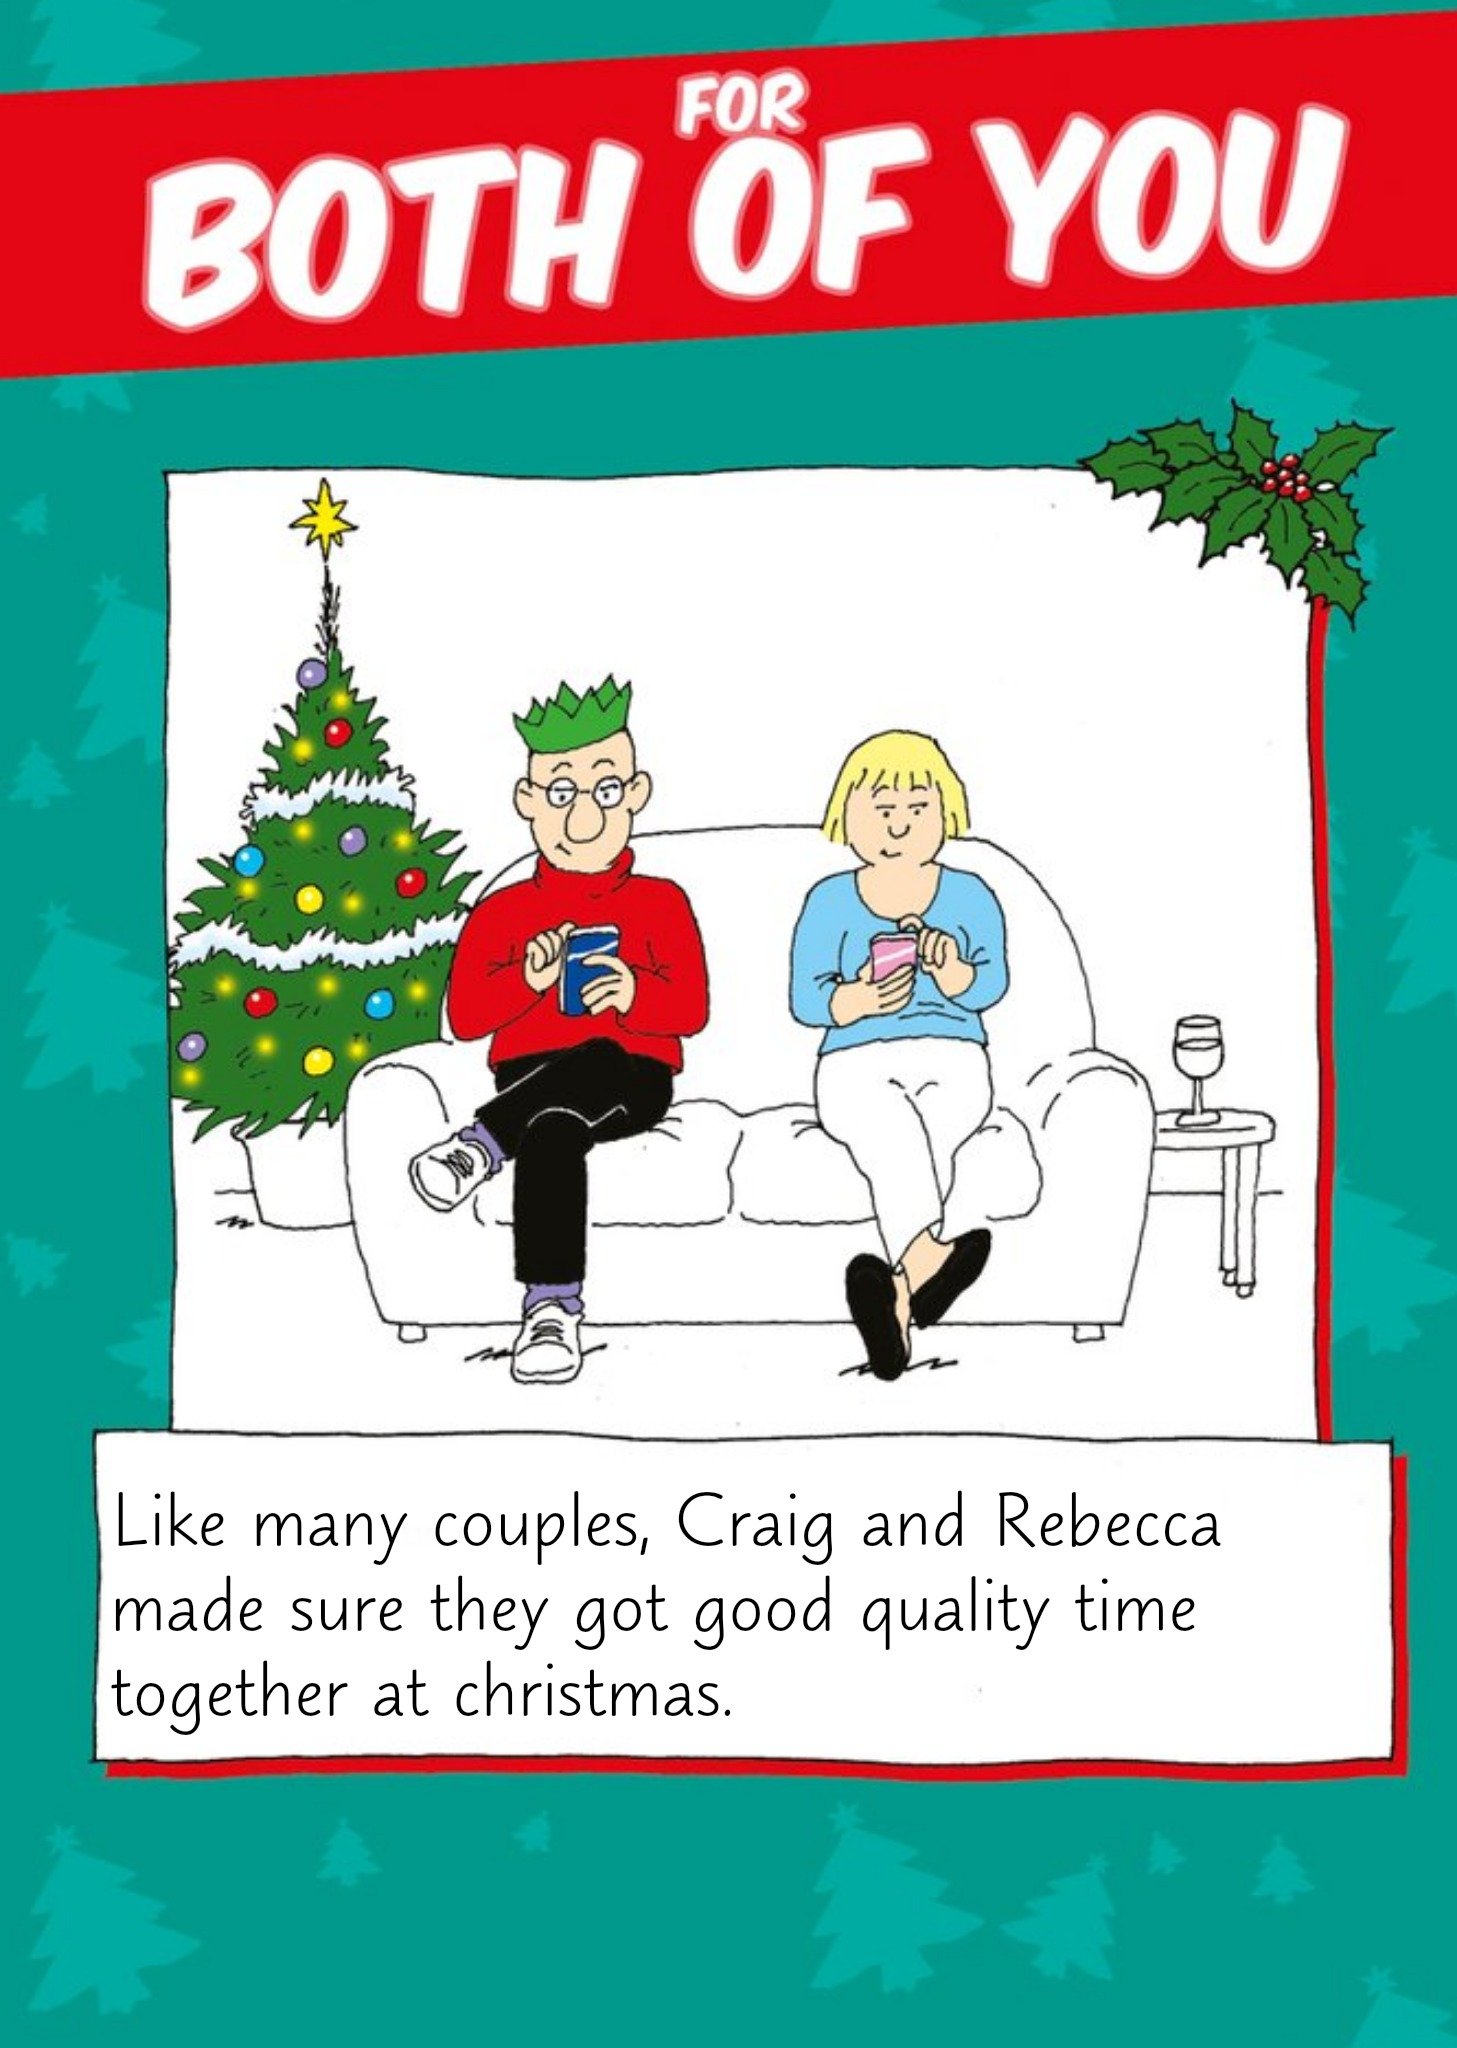 Moonpig Funny Christmas Card For The Both Of You Quality Time Together Ecard